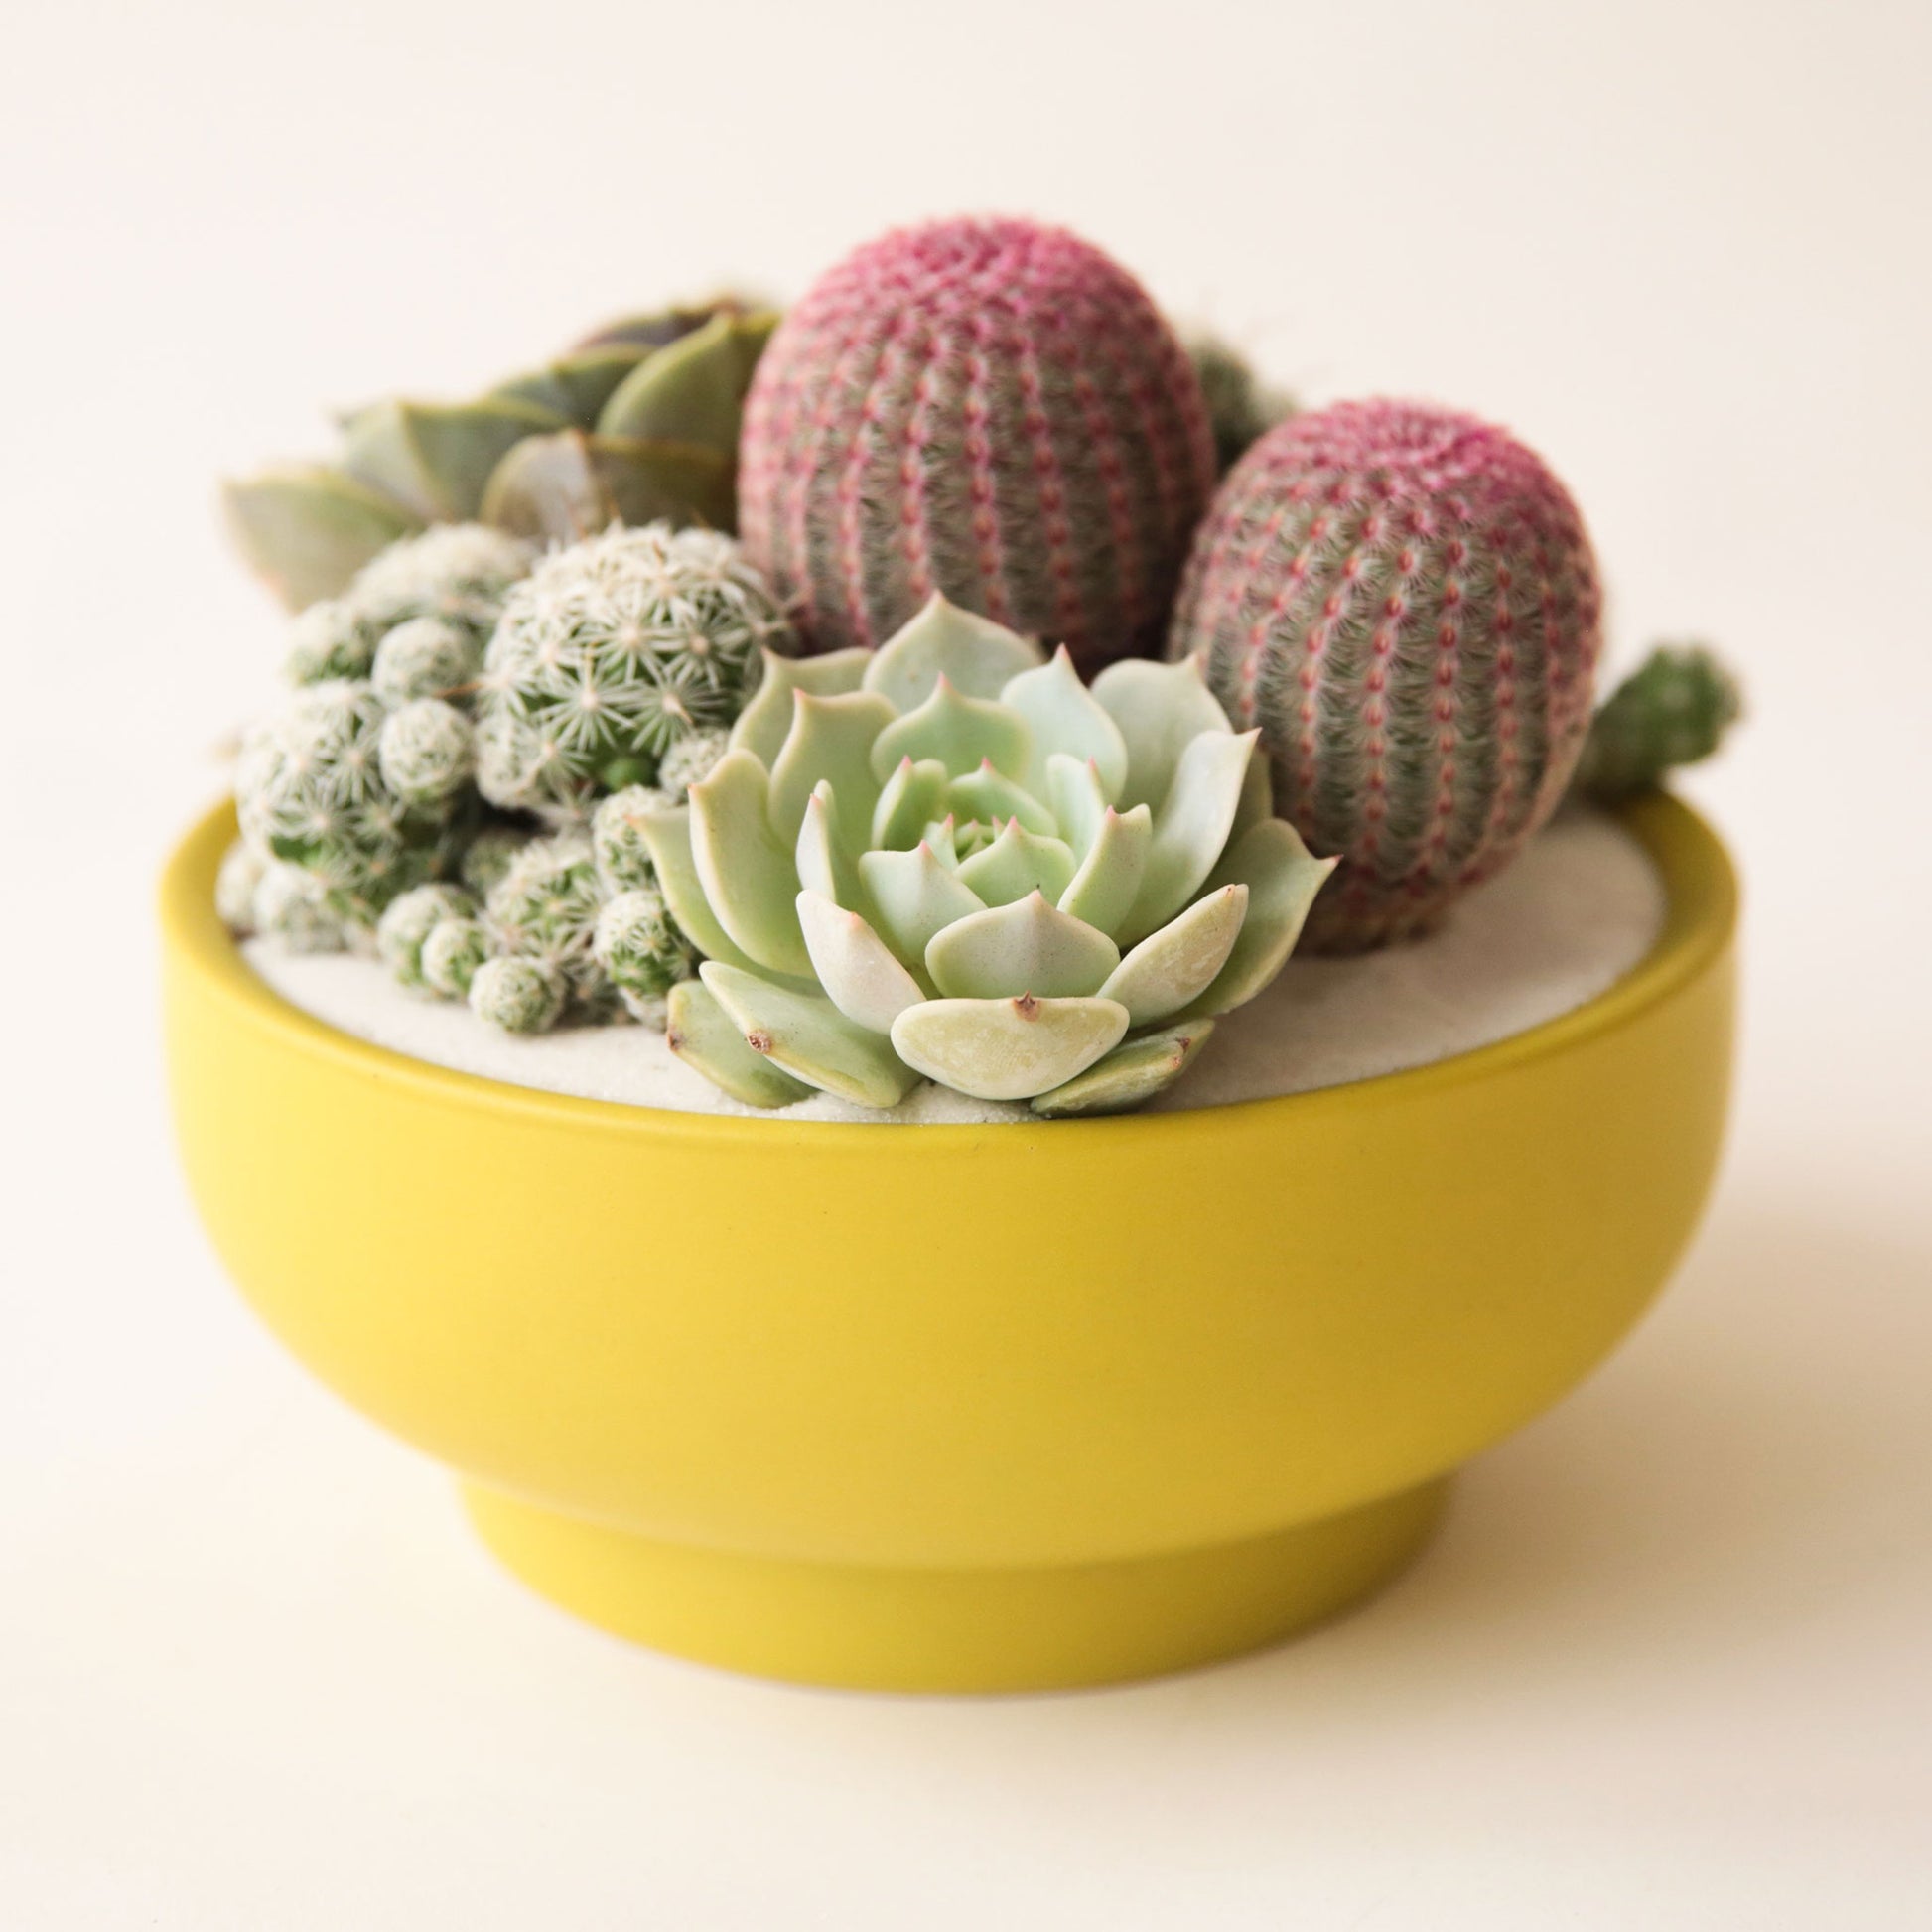 On a cream background is a chartreuse colored ceramic pedestal bowl that is filled with a succulent and cacti arrangement.